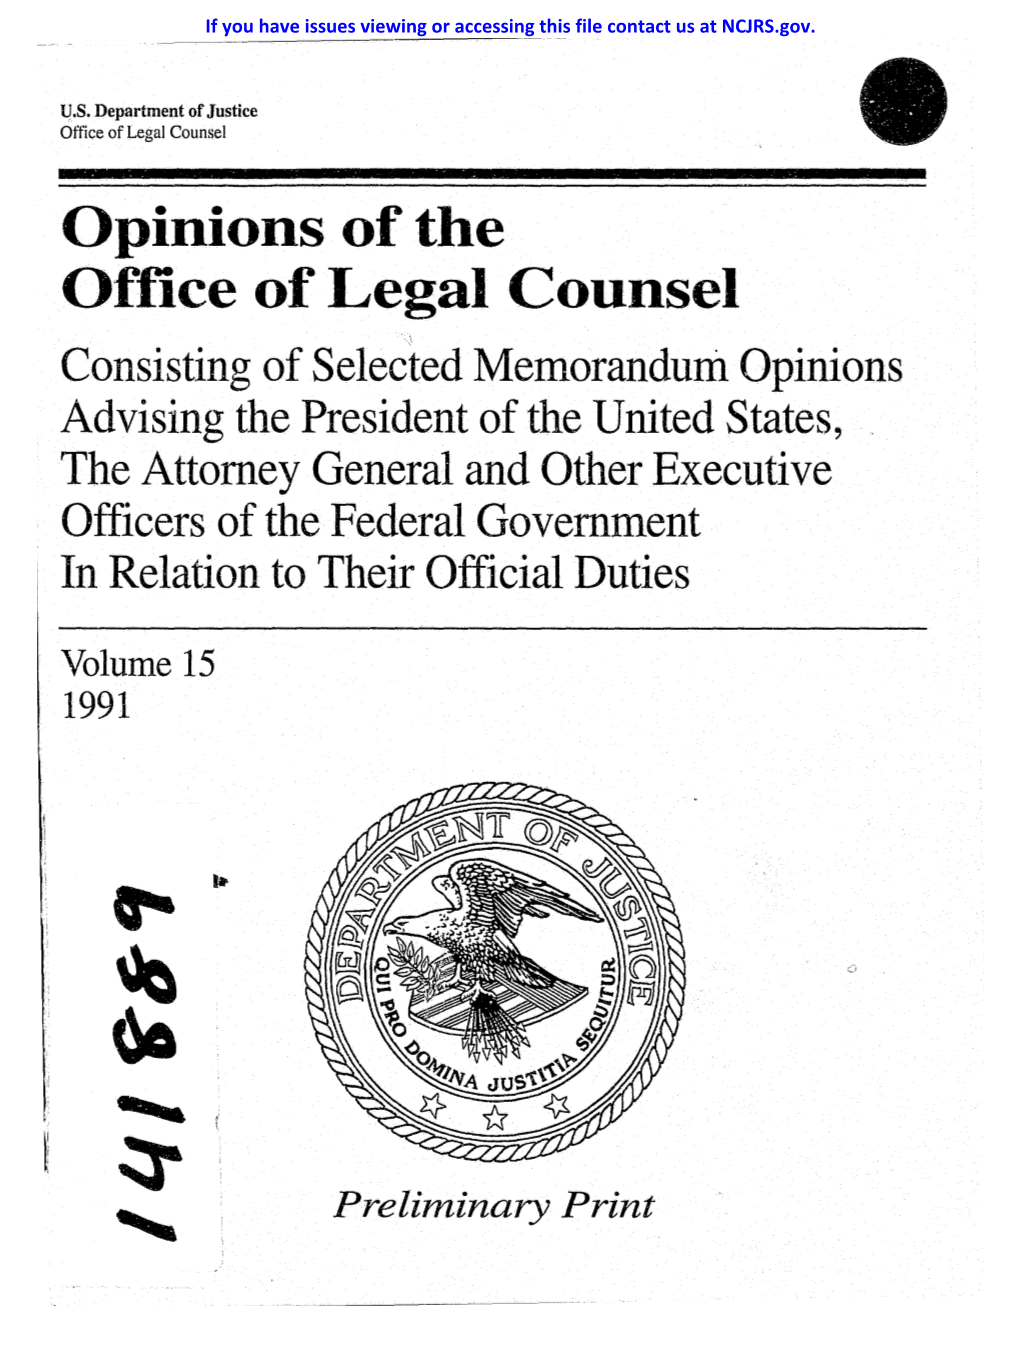 Opinions of the Office of Legal Counsel